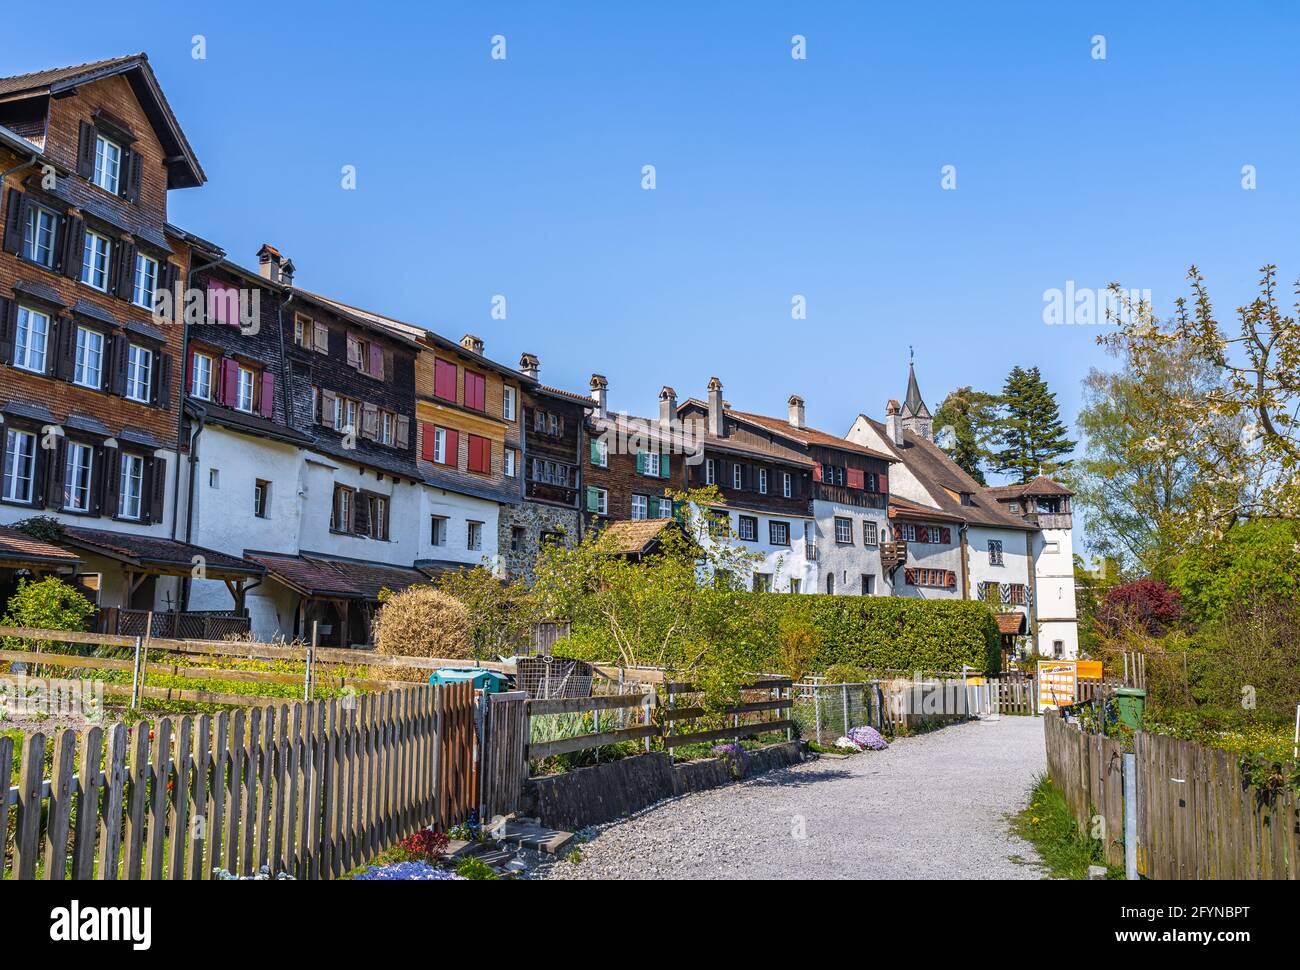 Werdenberg is a town with historical town charter in the eastern Swiss canton of St. Gallen. It is the smallest town of Switzerland. Stock Photo